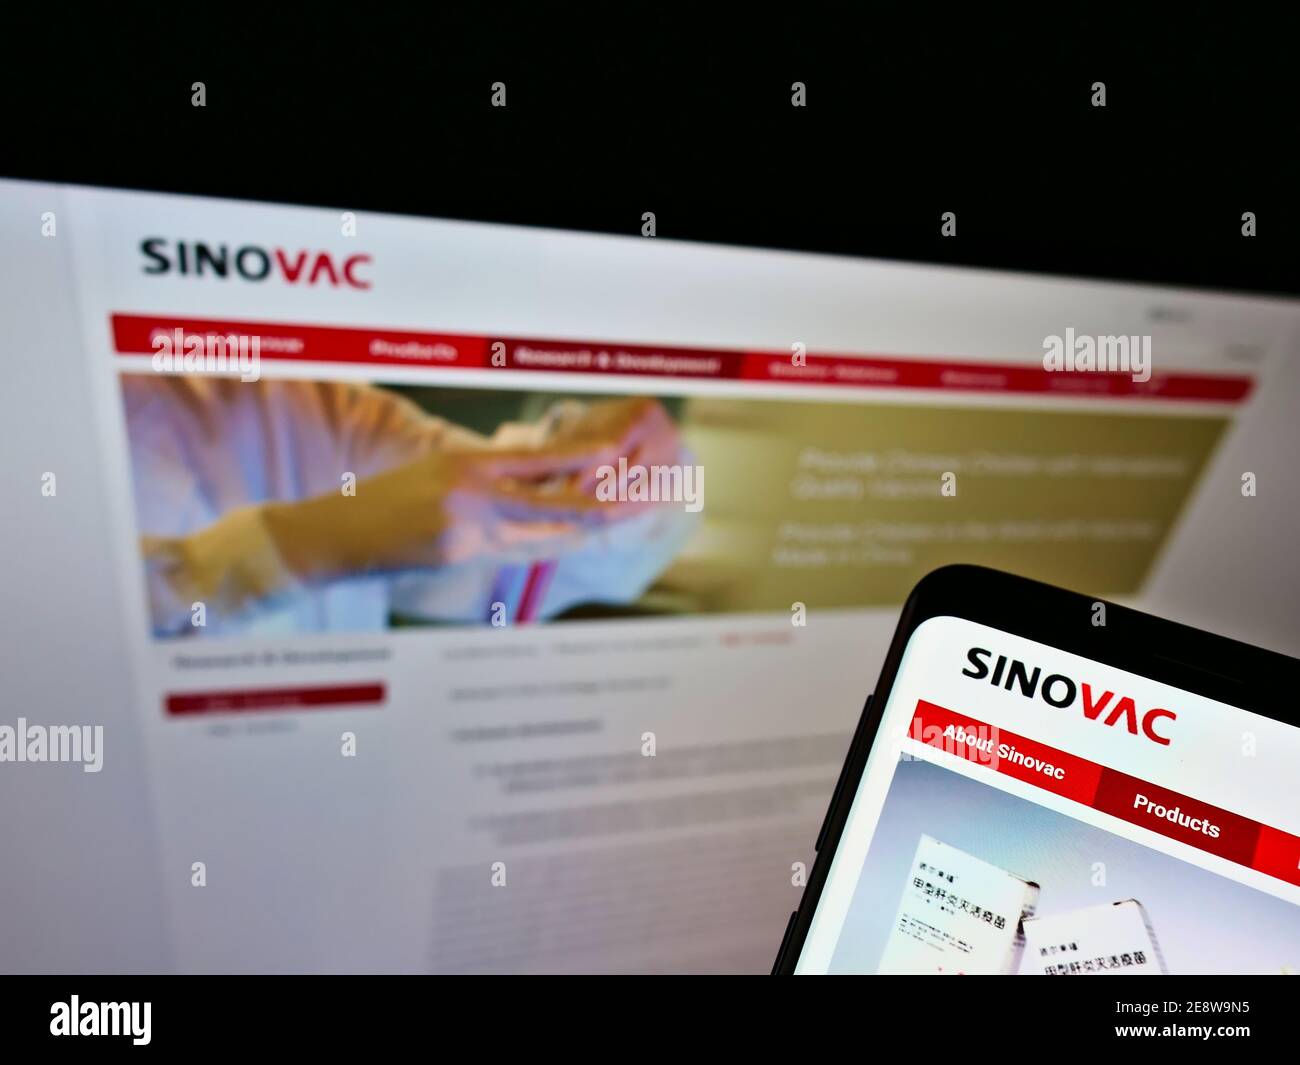 Phone with website and logo of Chinese biotechnology company Sinovac Biotech Ltd. on screen in front of web page. Focus on top left of phone display. Stock Photo